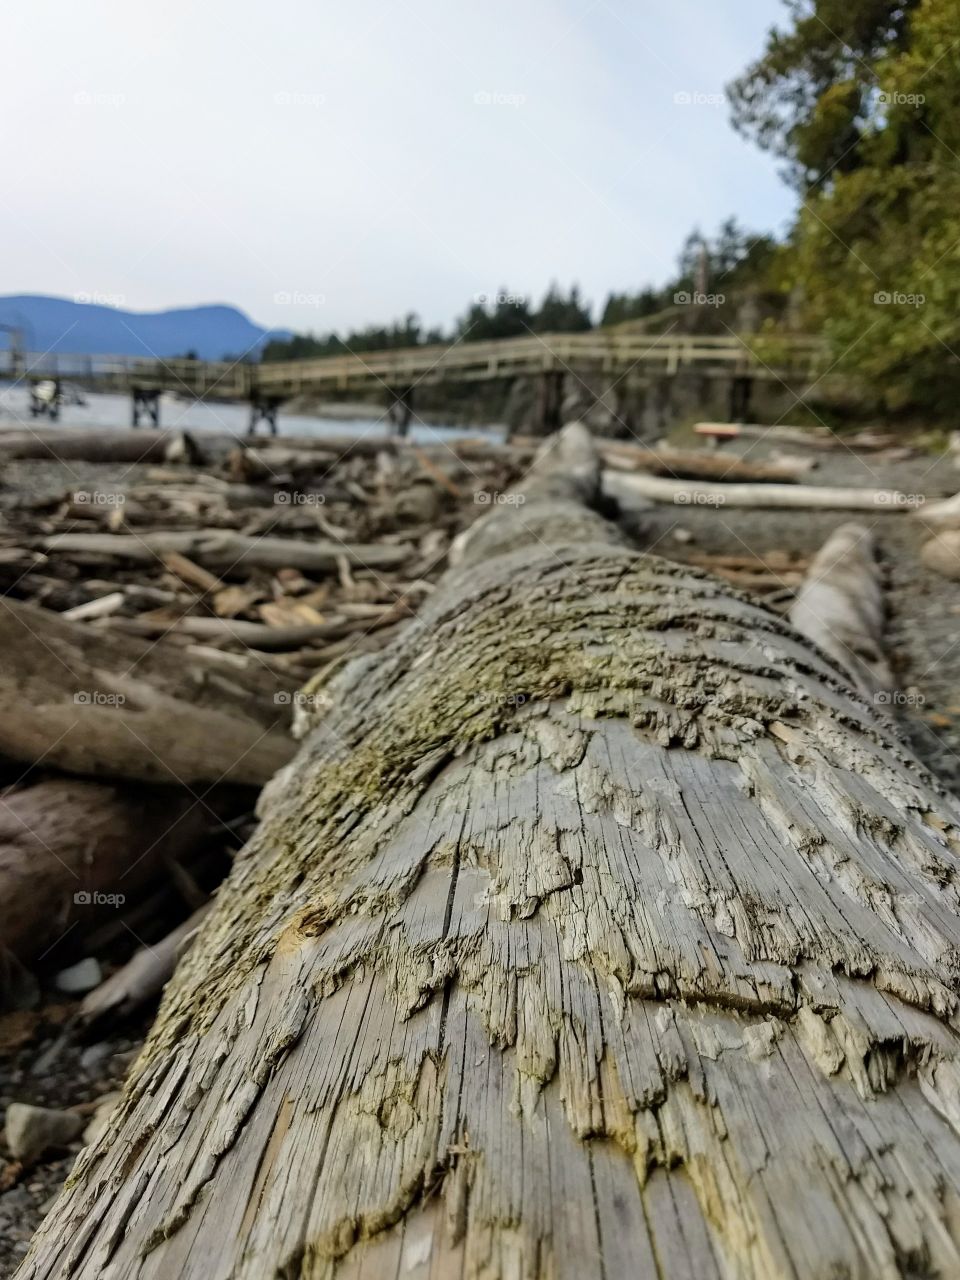 Weathered driftwood logs pile up on the shore with a pier visible near the horizon.